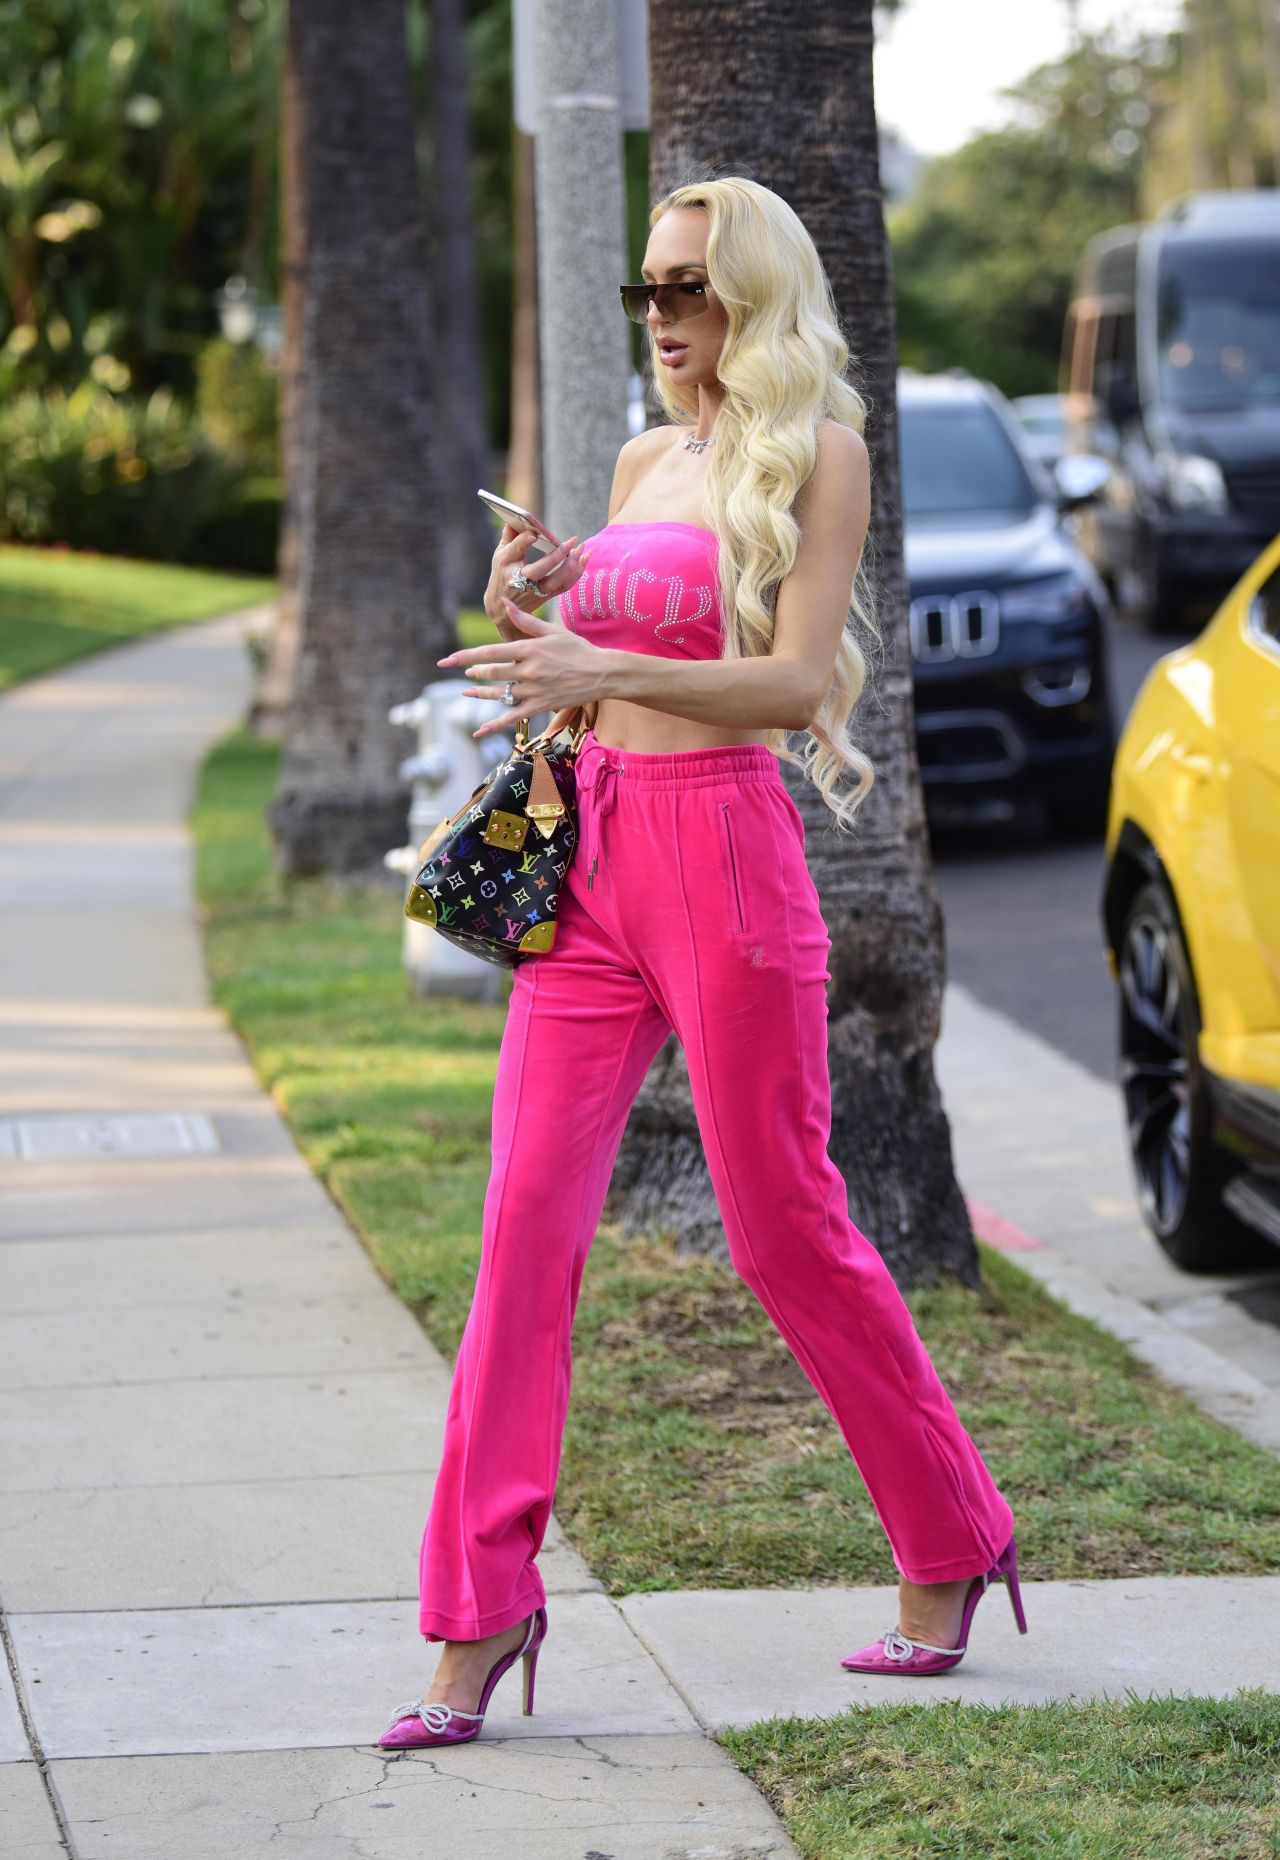 Paris Hilton and Saweetie sport Juicy Couture tracksuits in Bentley for  shoot in Beverly Hills